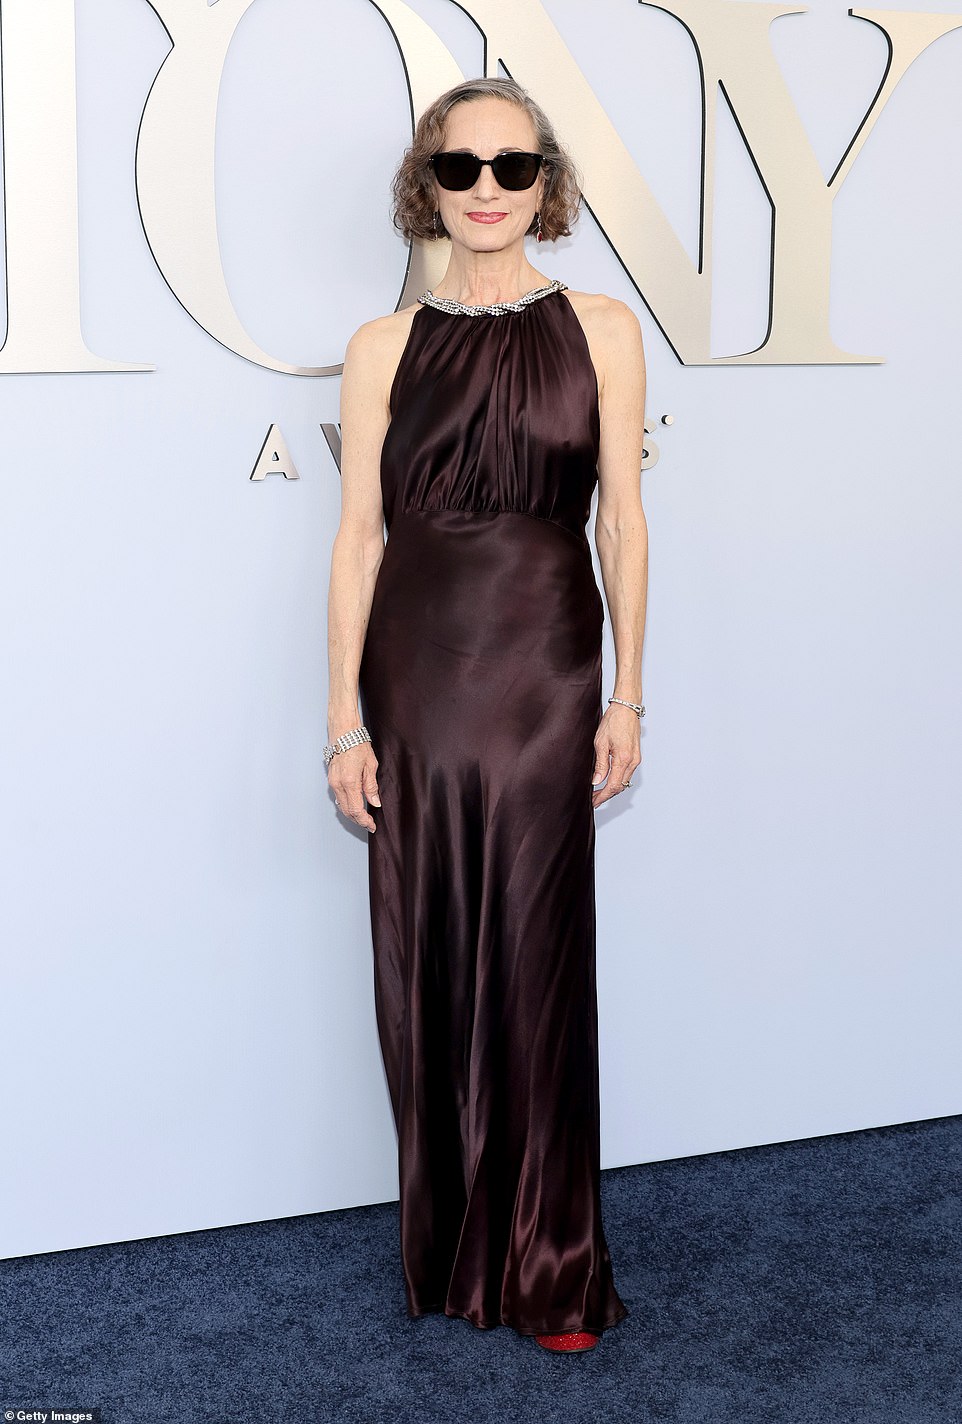 Bebe Neuwirth chose a chocolate hued gown with a crystal embellished neckline